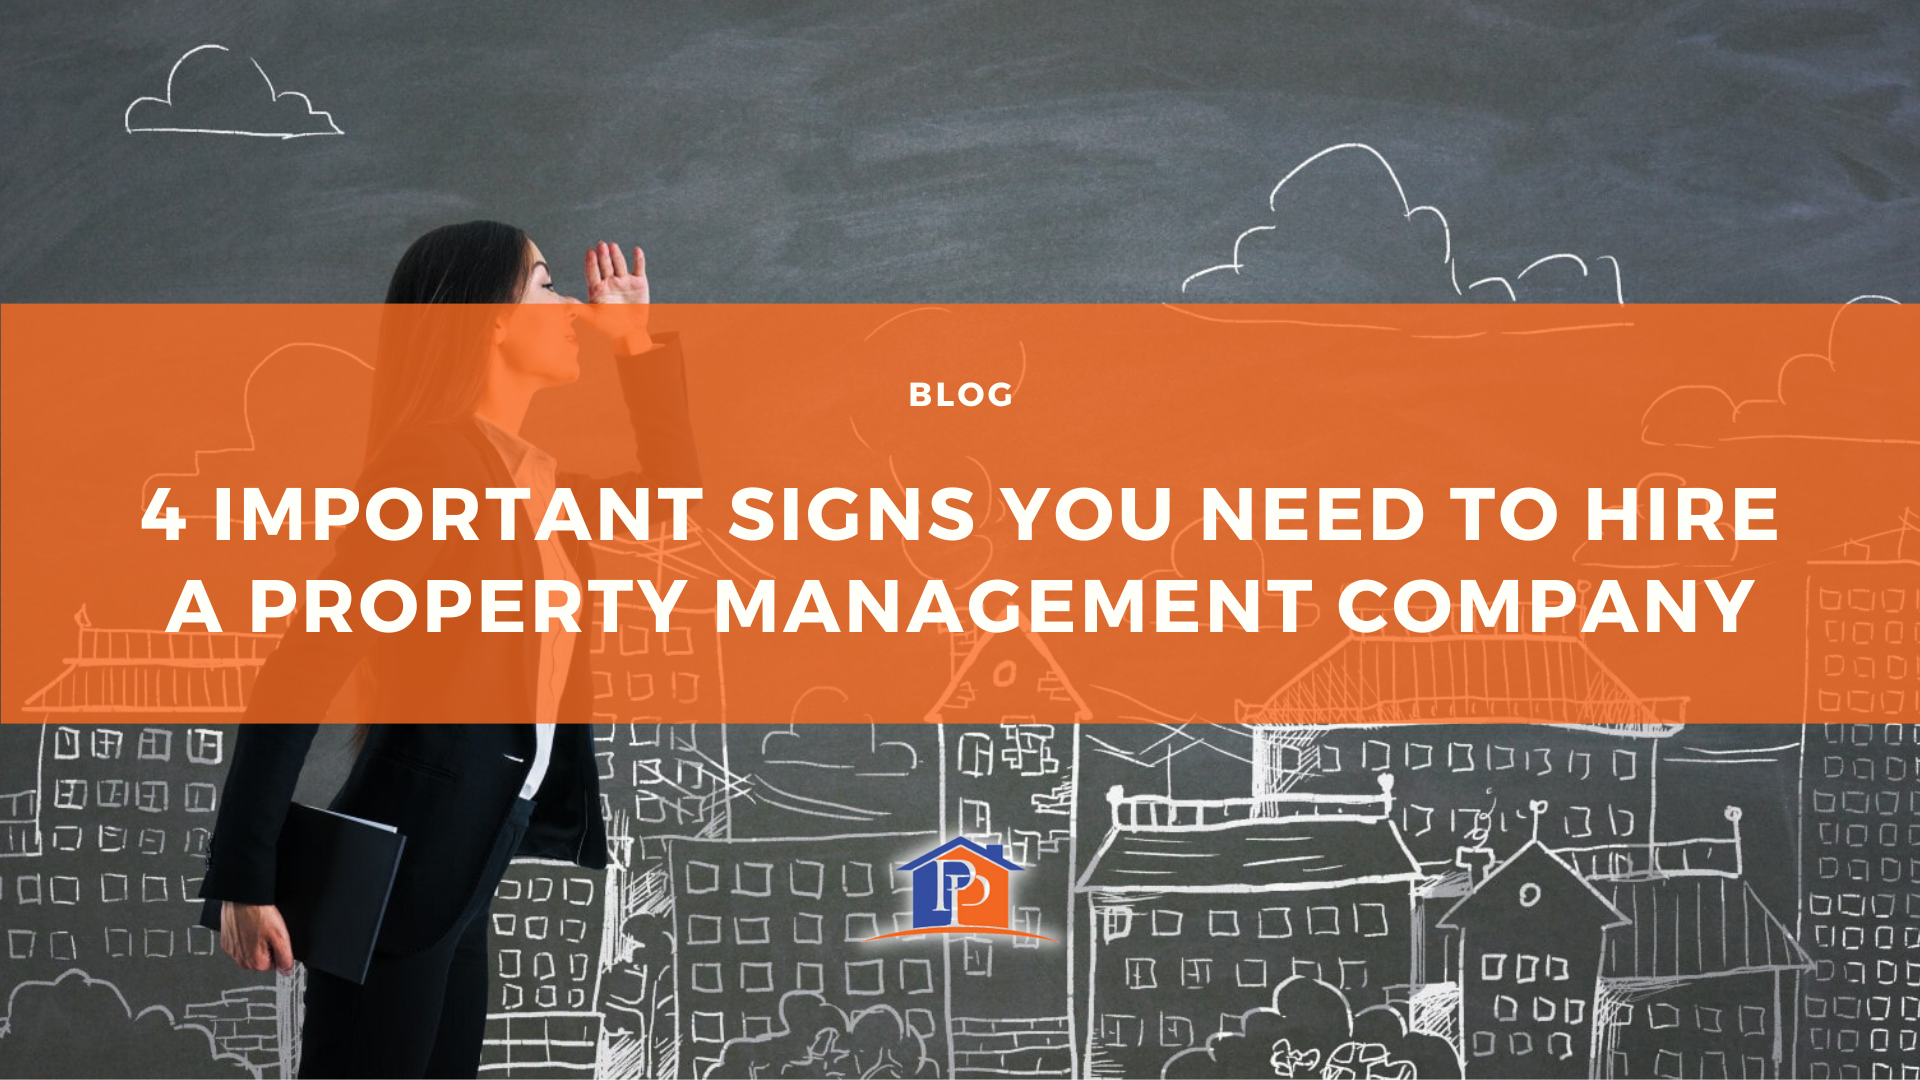 4 Important Signs You Need to Hire a Property Management Company